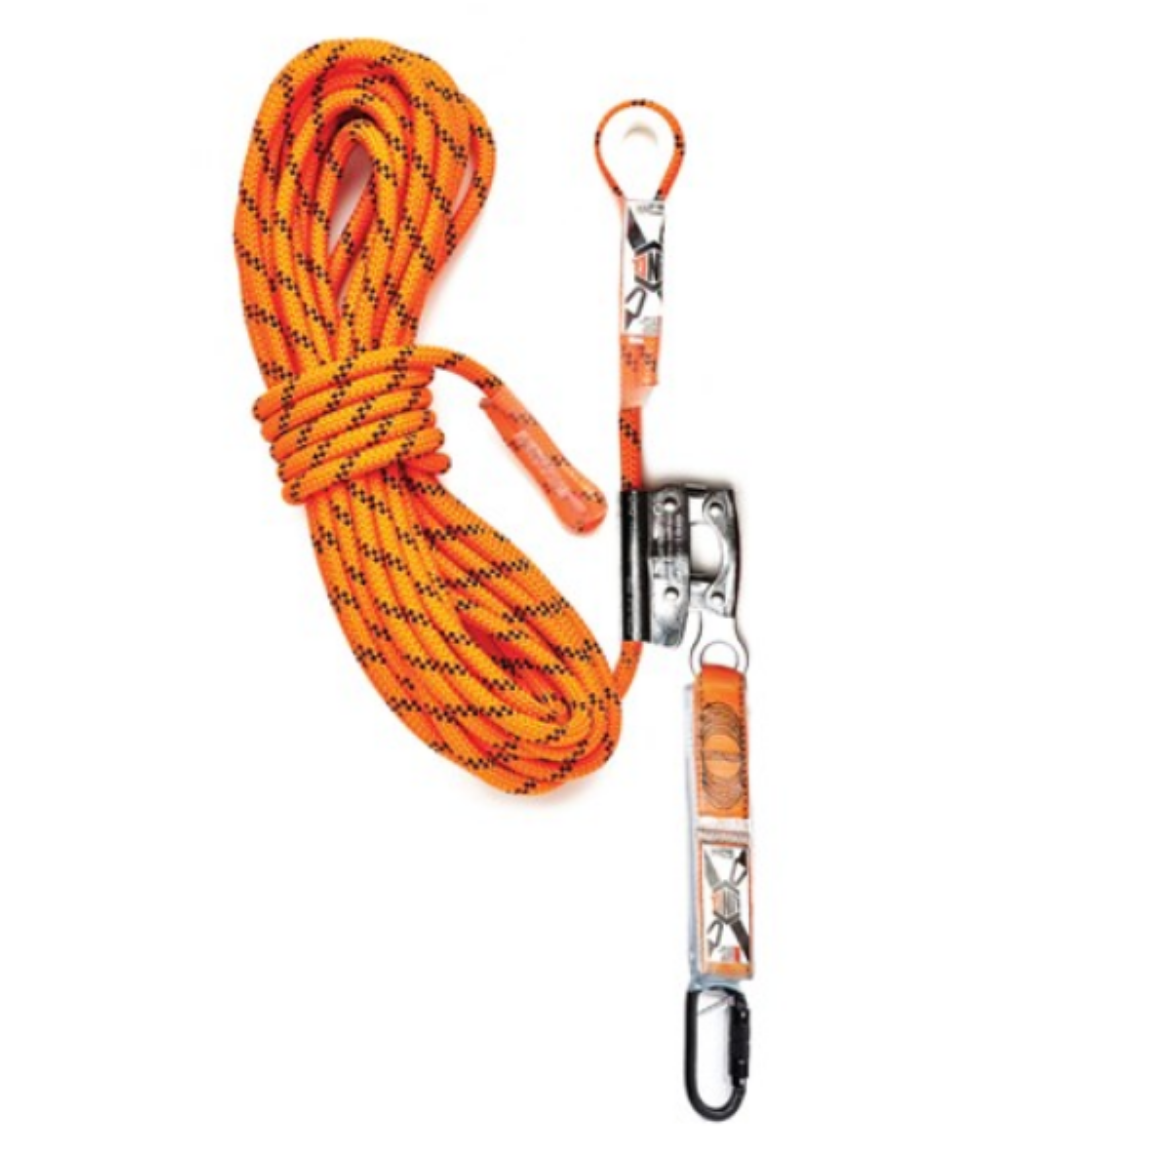 Picture of LINQ KERMNATLE ROPE WITH THIMBLE EYE & WLSA450 ATTACHED TO ROPE GRAB 15M